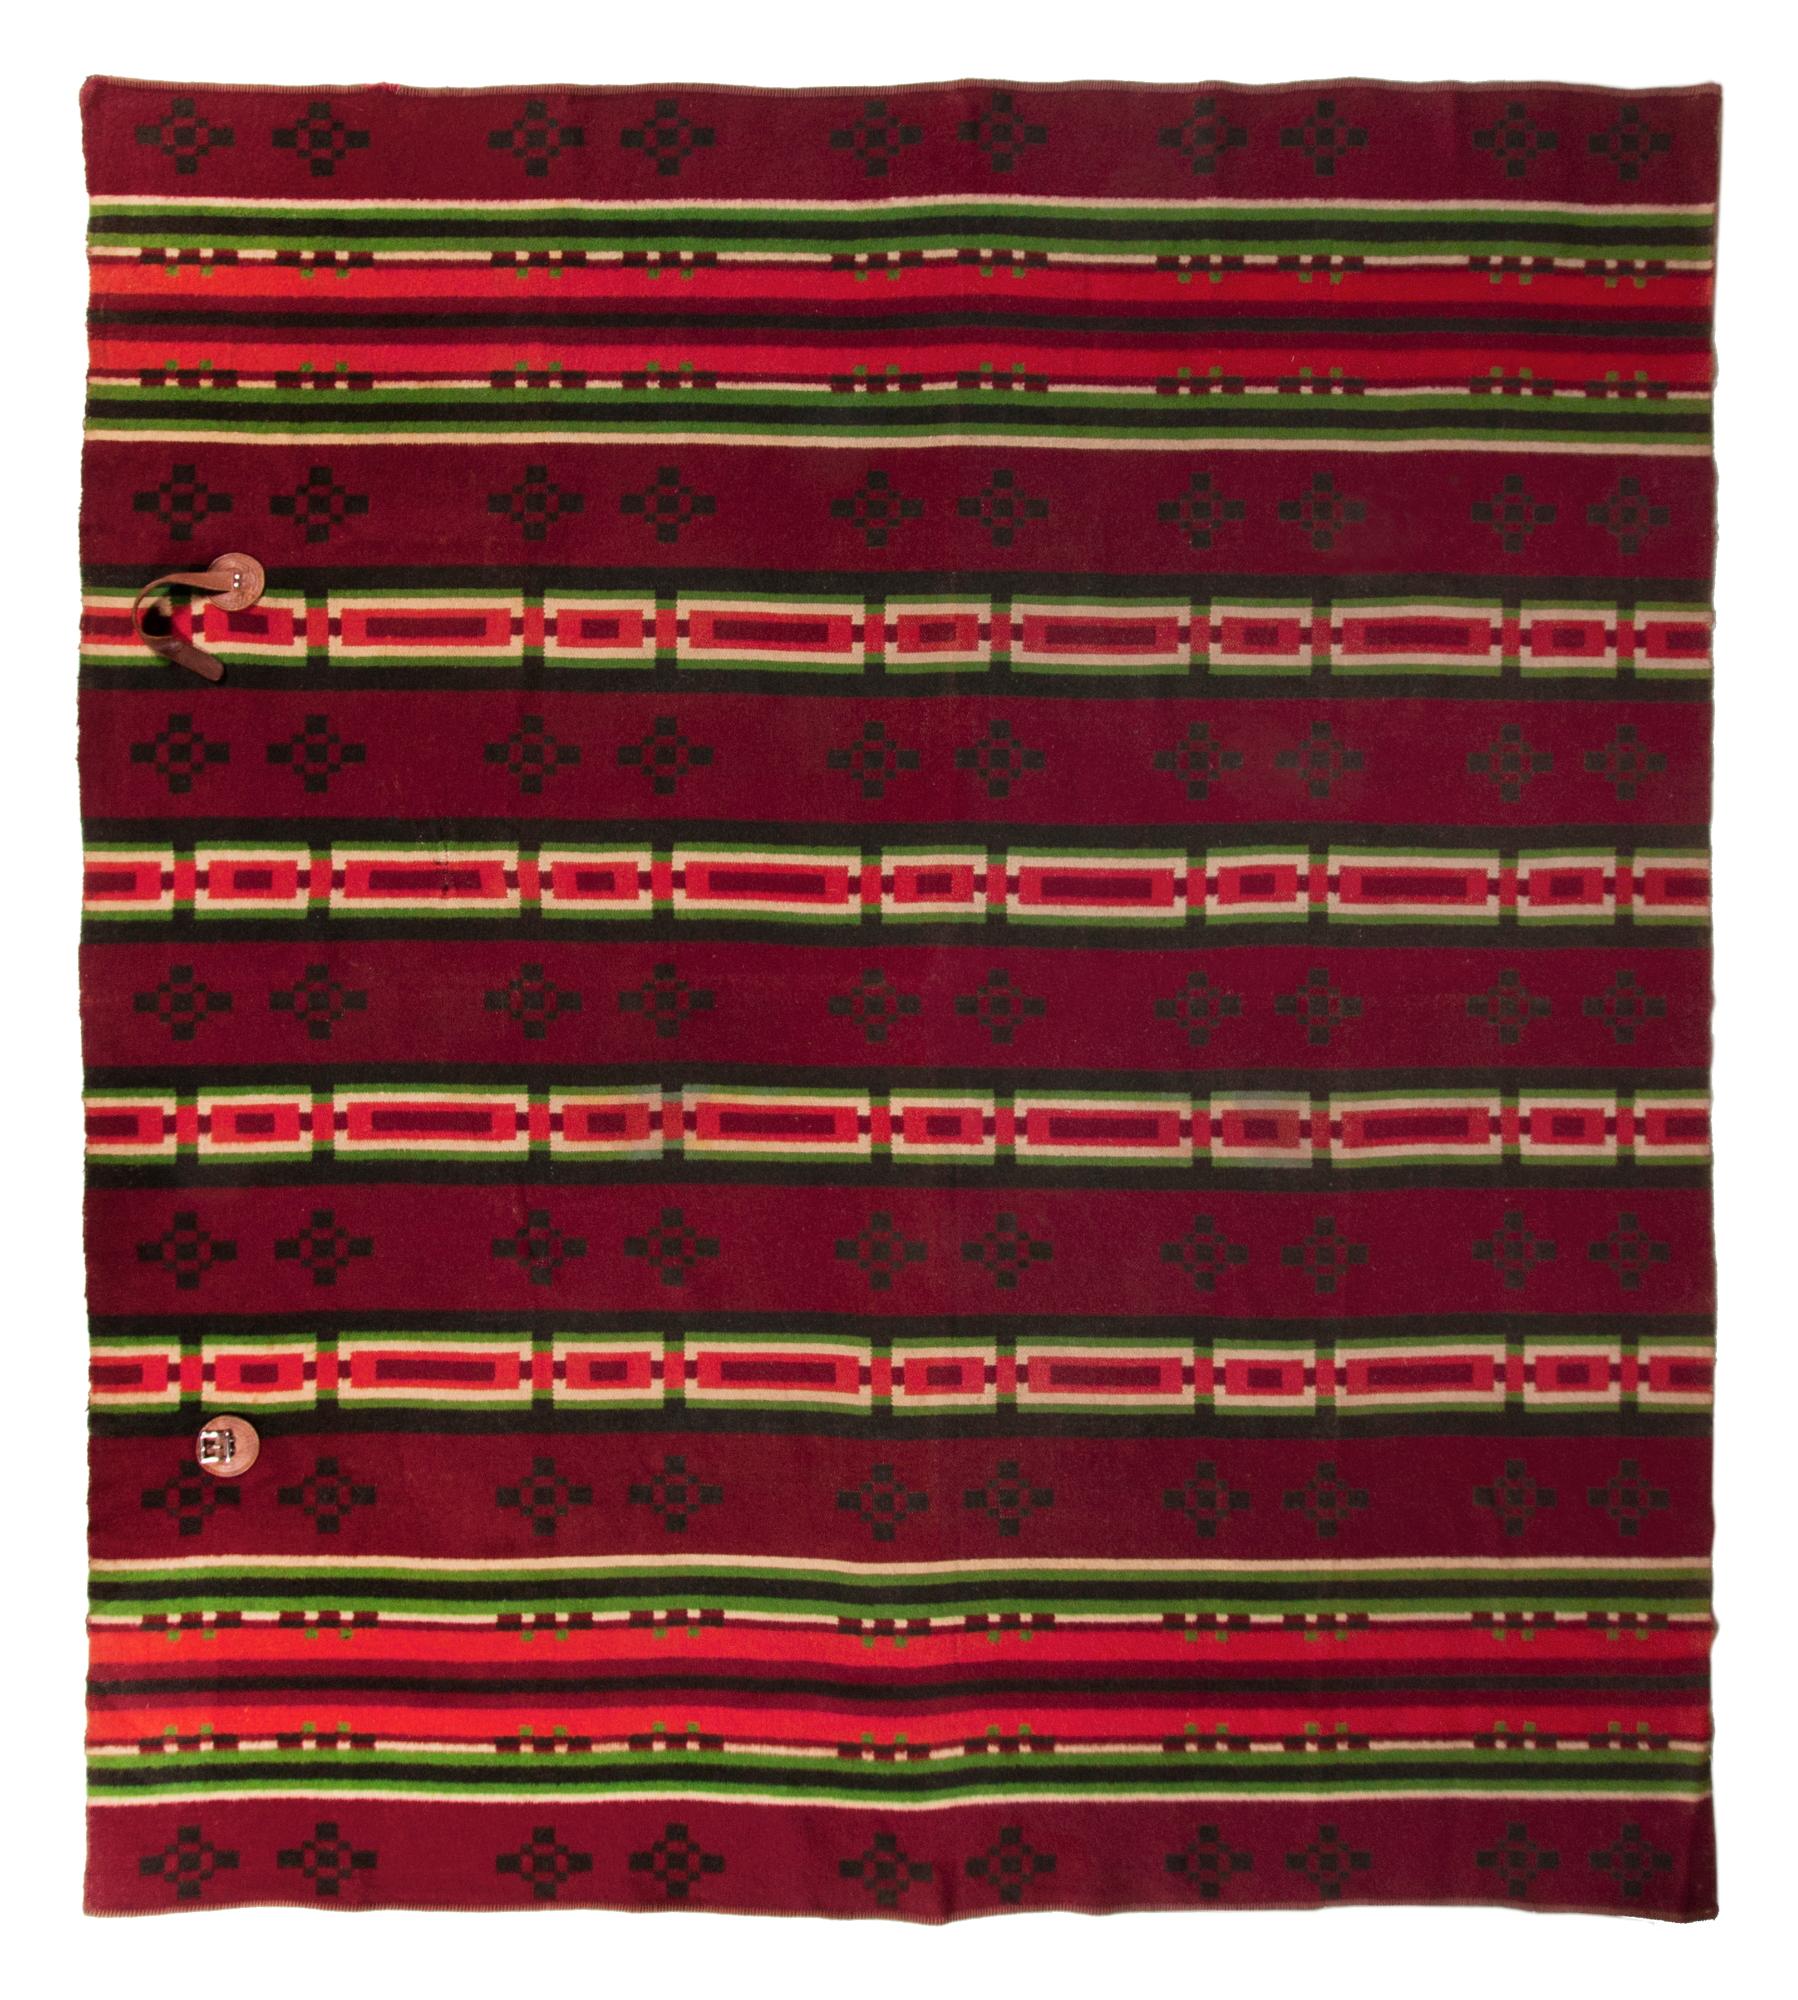 Loom-woven horse blanket, made circa 1890-1910. The striped and geometric pattern consists of lime green, sunfire red, and ivory, against winter/summer, reversible grounds of forest green and burgundy. Constructed of wool and cotton, the long edges